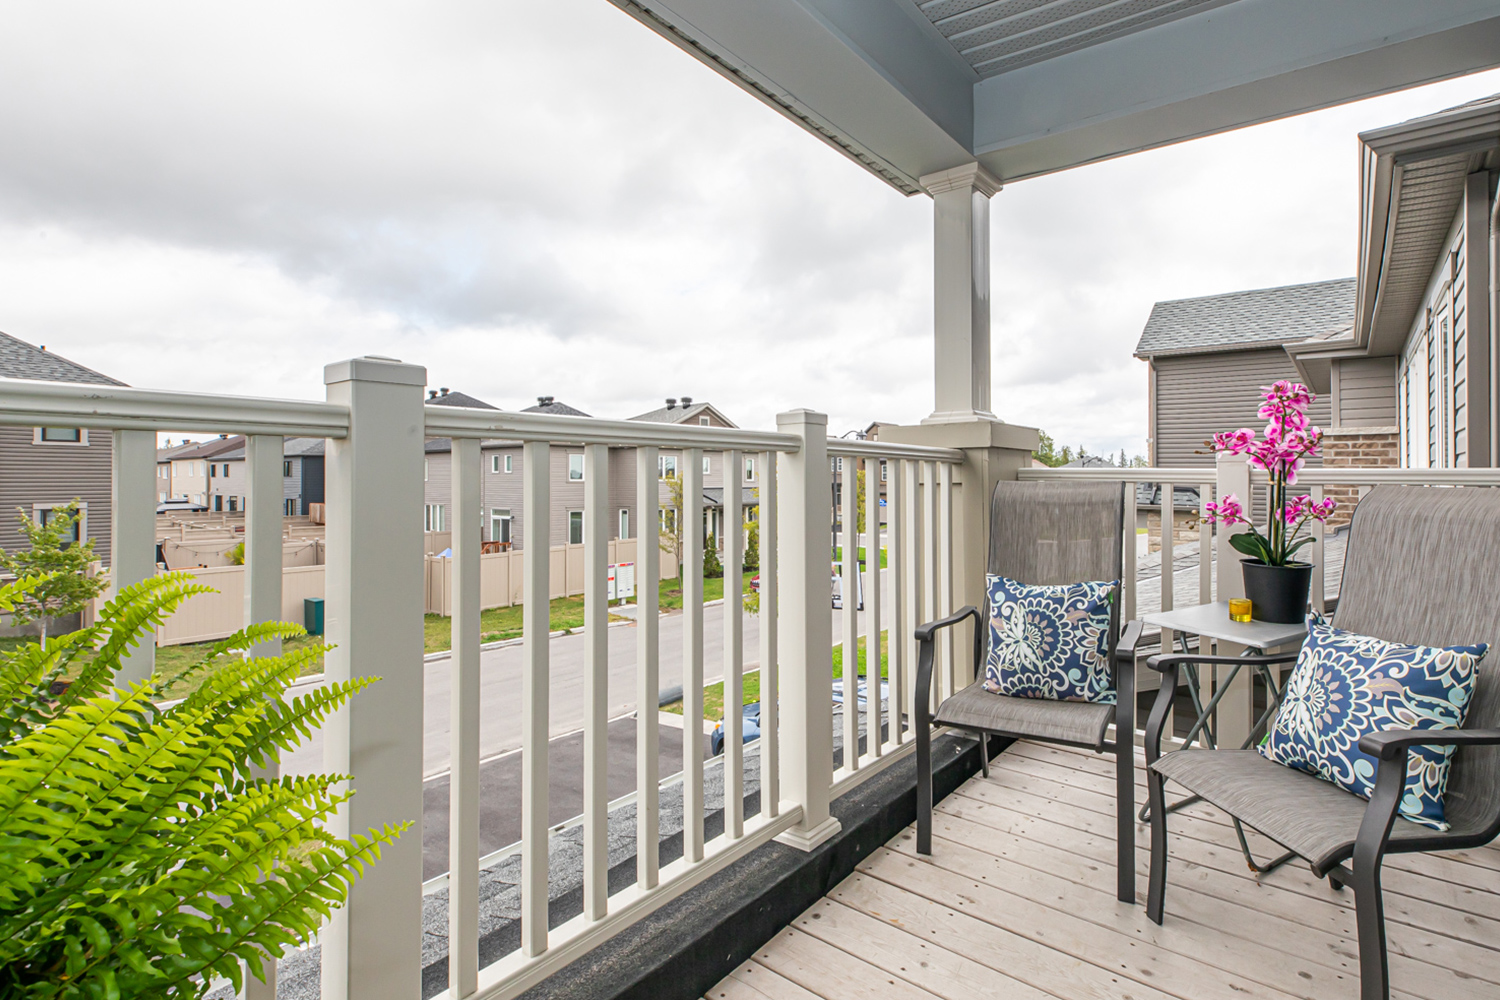 Listing__142-Discovery-Crescent__14